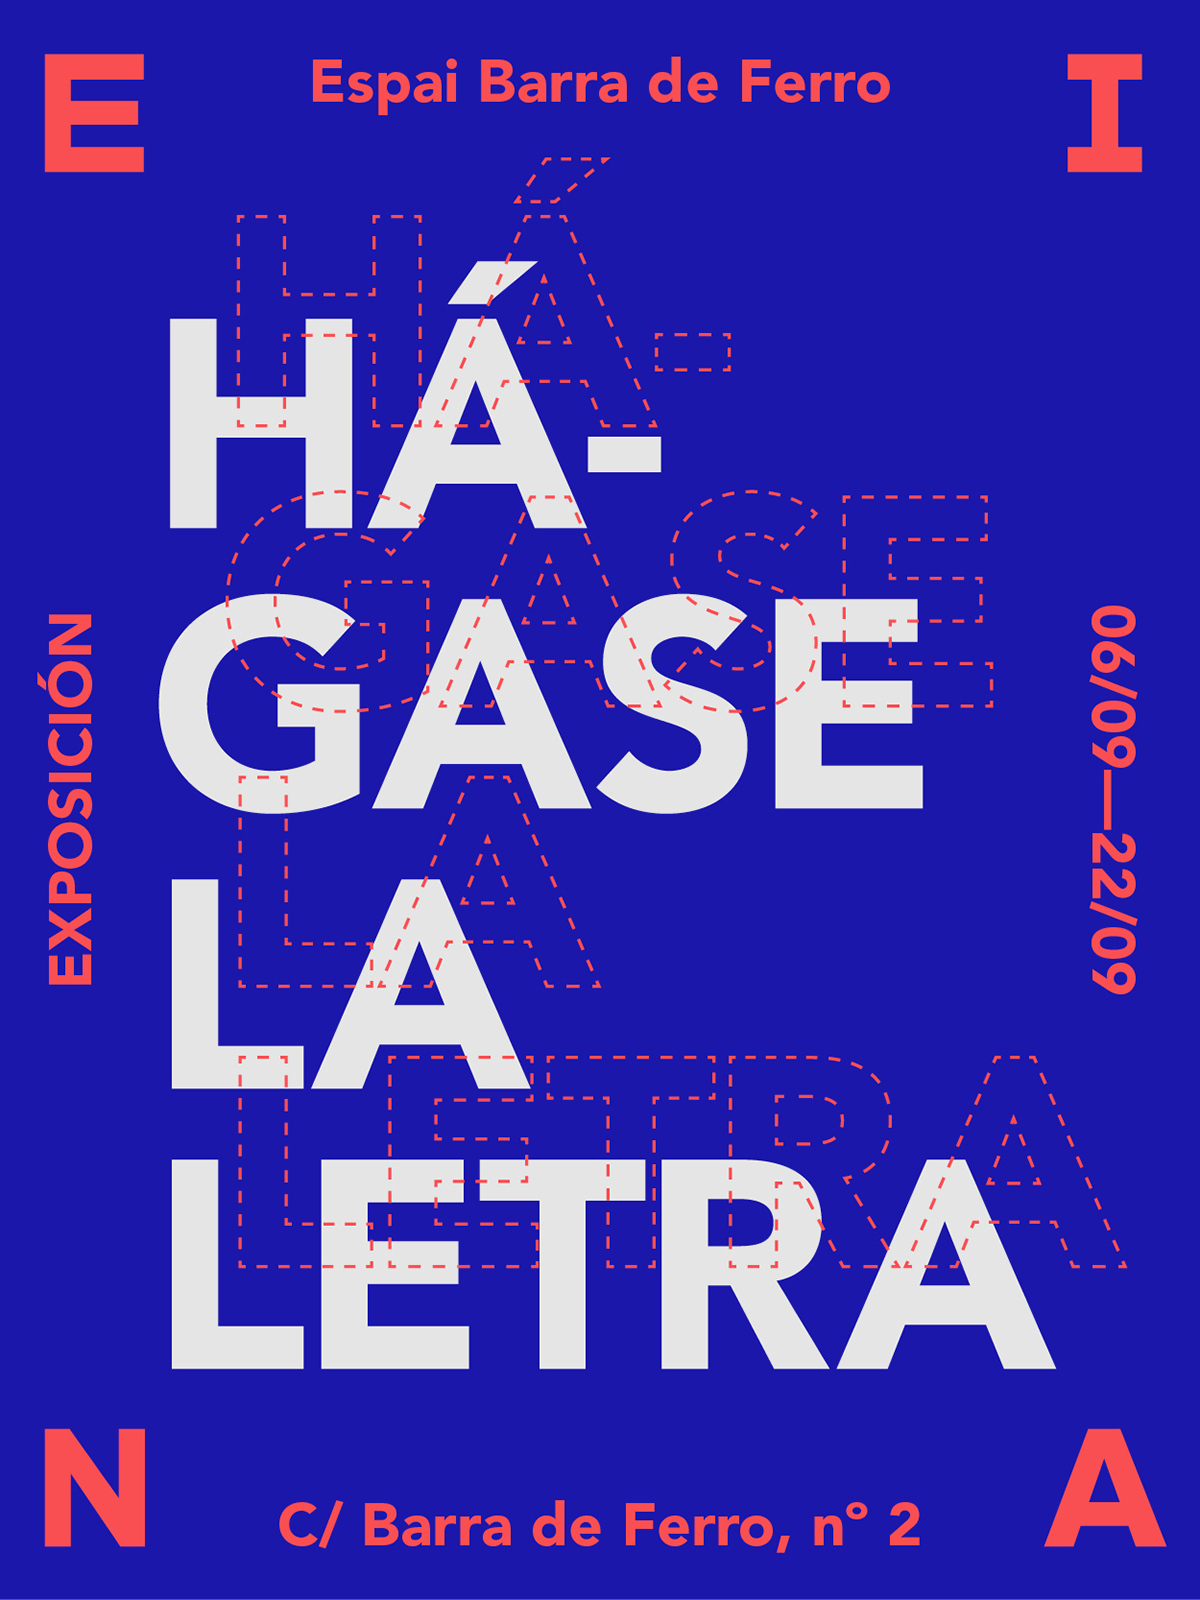 eina student type Exhibition  flyer poster Collaboration tipo letra